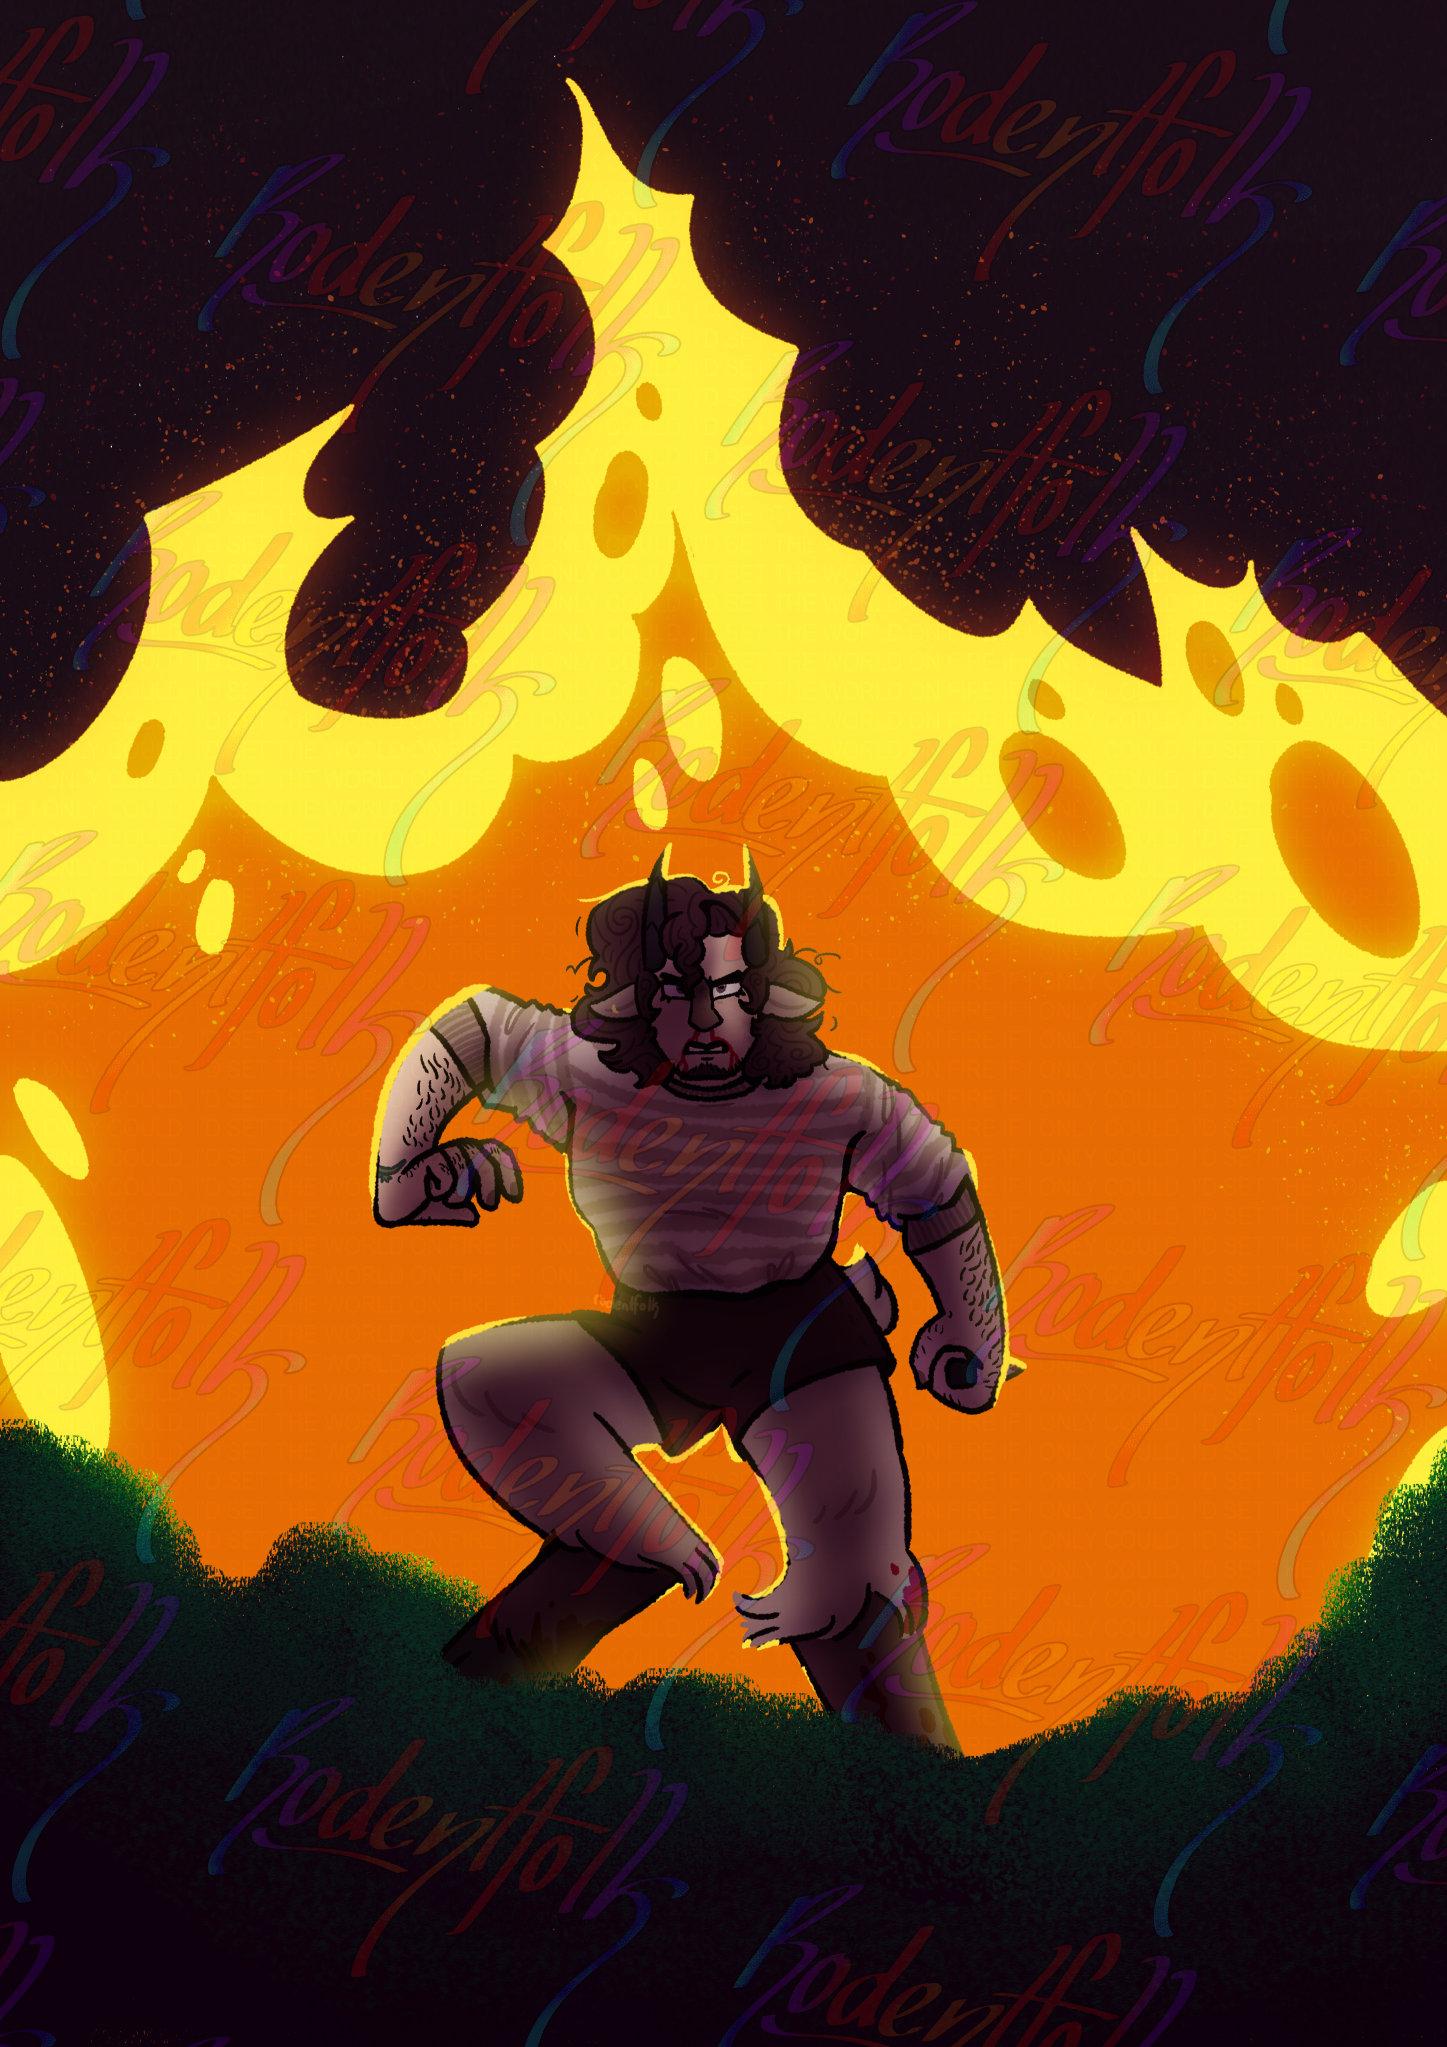 It is an illustration of Nik's character Monty. He is standing hunched over a hill like mound, holding a bloody dagger and glaring at the viewer as fire engulfs the background. Upon closer inspection the phrase If I only could I'd set the world on fire can be seen repeated over and over again in the flames.